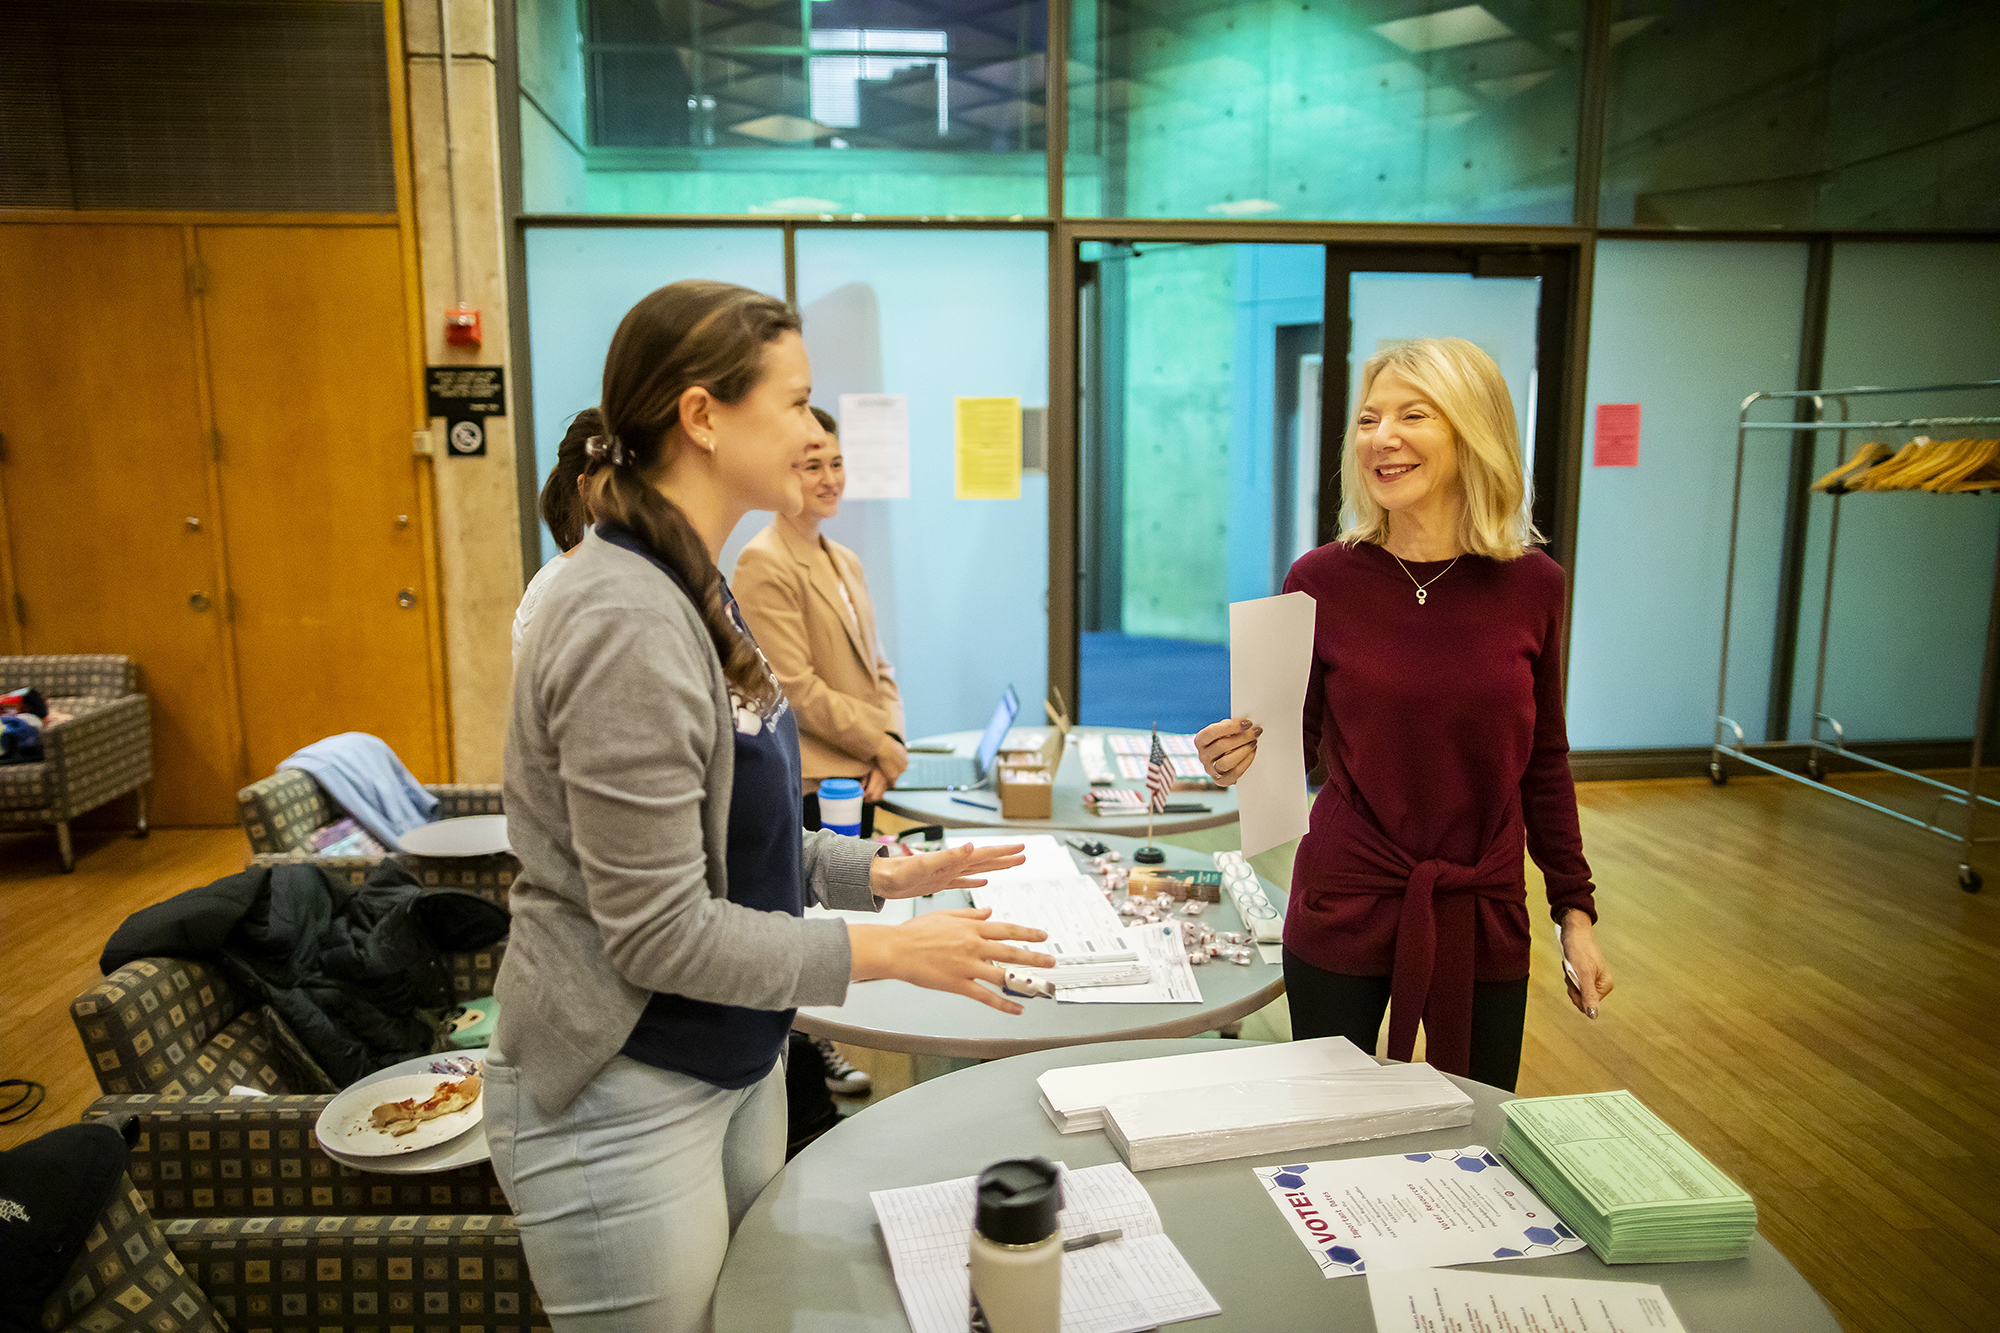 Penn President Amy Gutmann receives her paper ballot for use in the voting machine from a poll worker at Vance Hall.